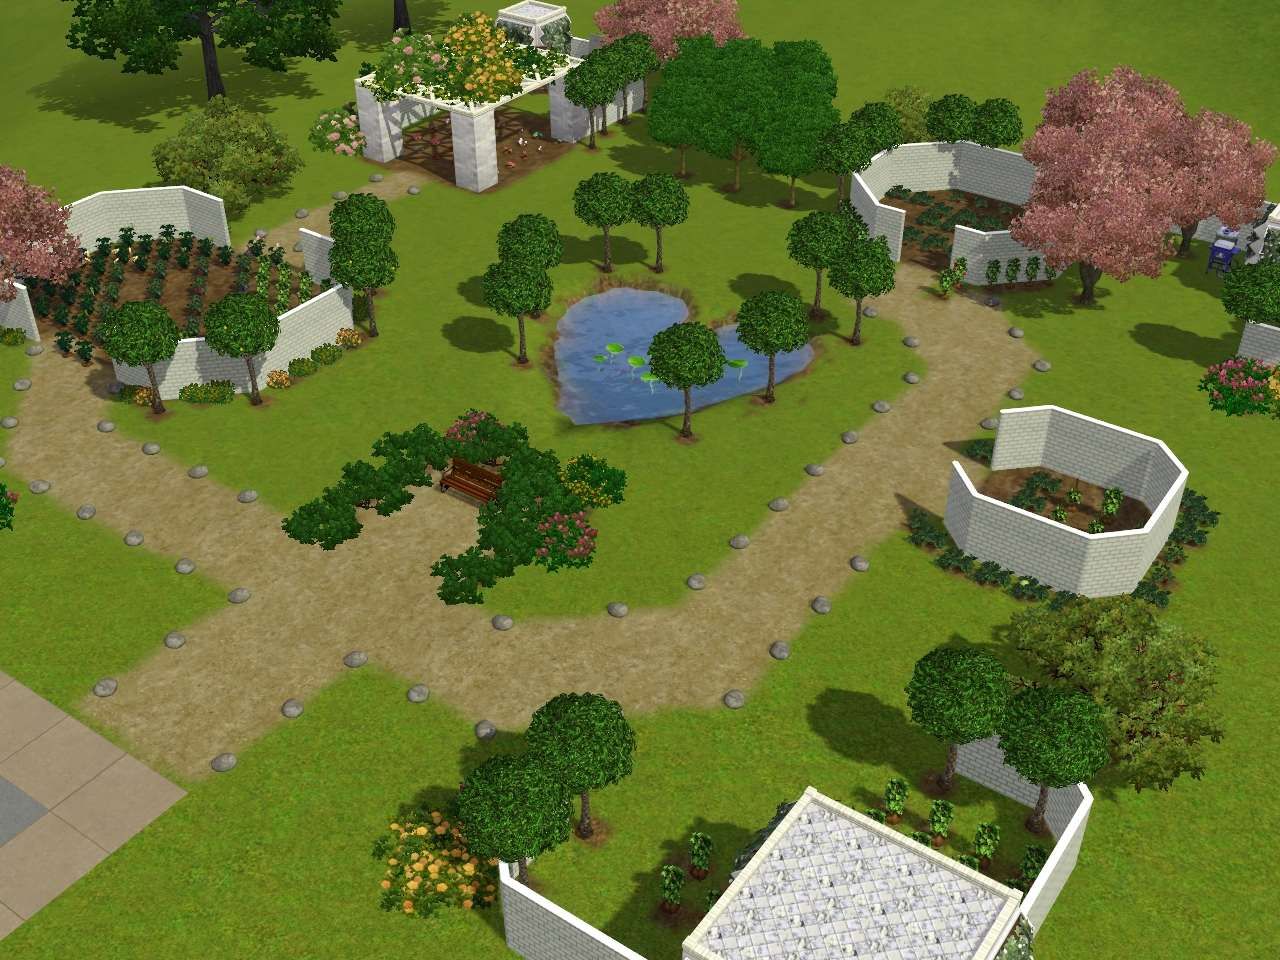 Sims 3 Jardinage Best Of Sims 3 Landscape Design Google Search